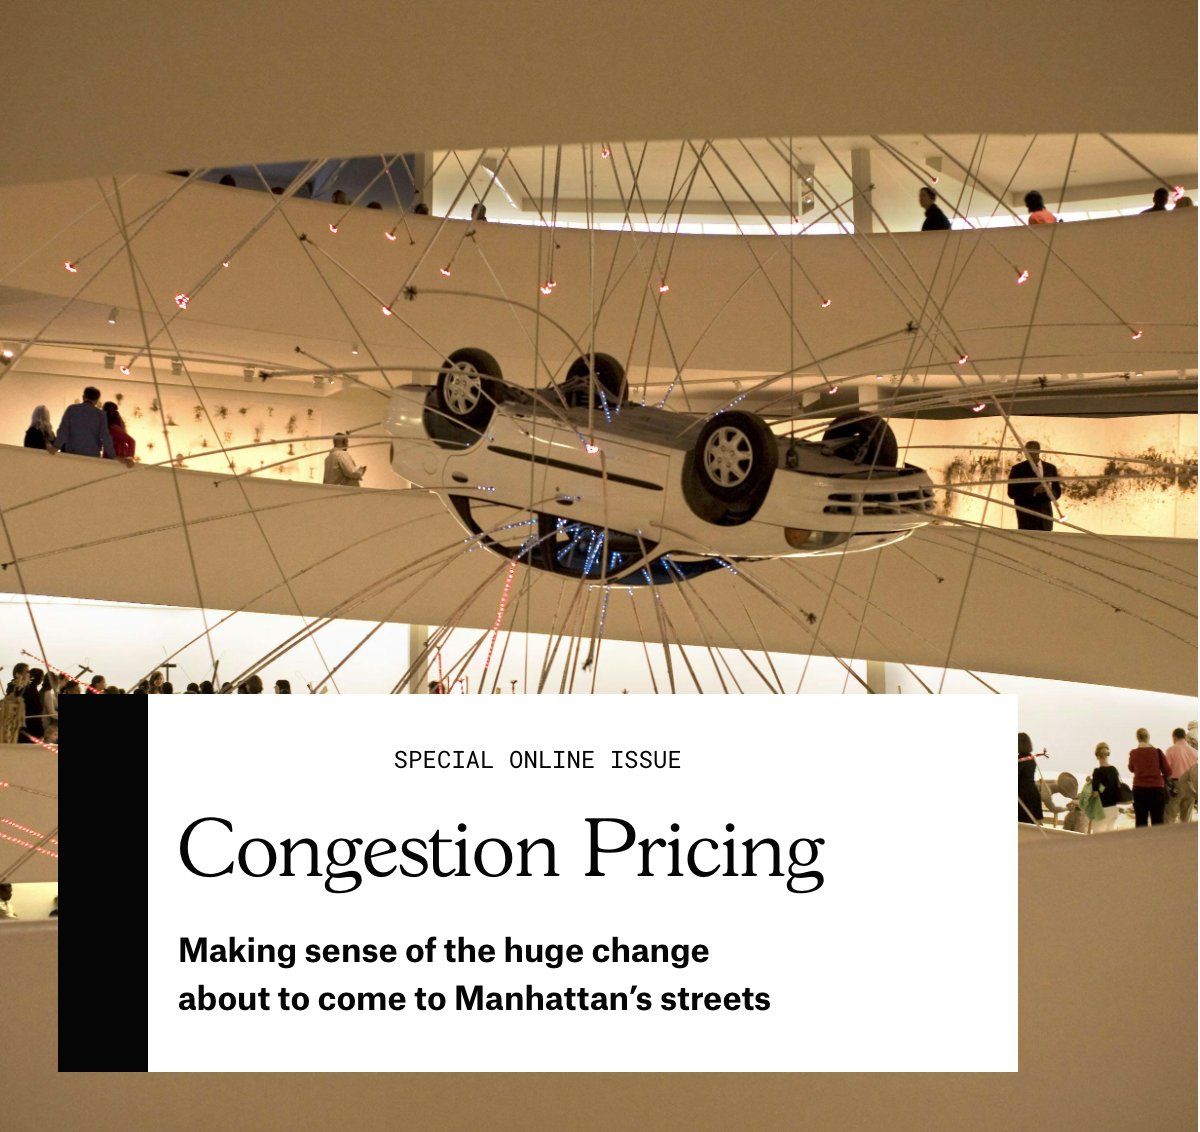 If you are at all like me and haven't thought deeply about congestion pricing, you might want to check out this special Vital City online-only issue which takes a look at the potential challenges and opportunities -- vitalcitynyc.org/issues/congest…